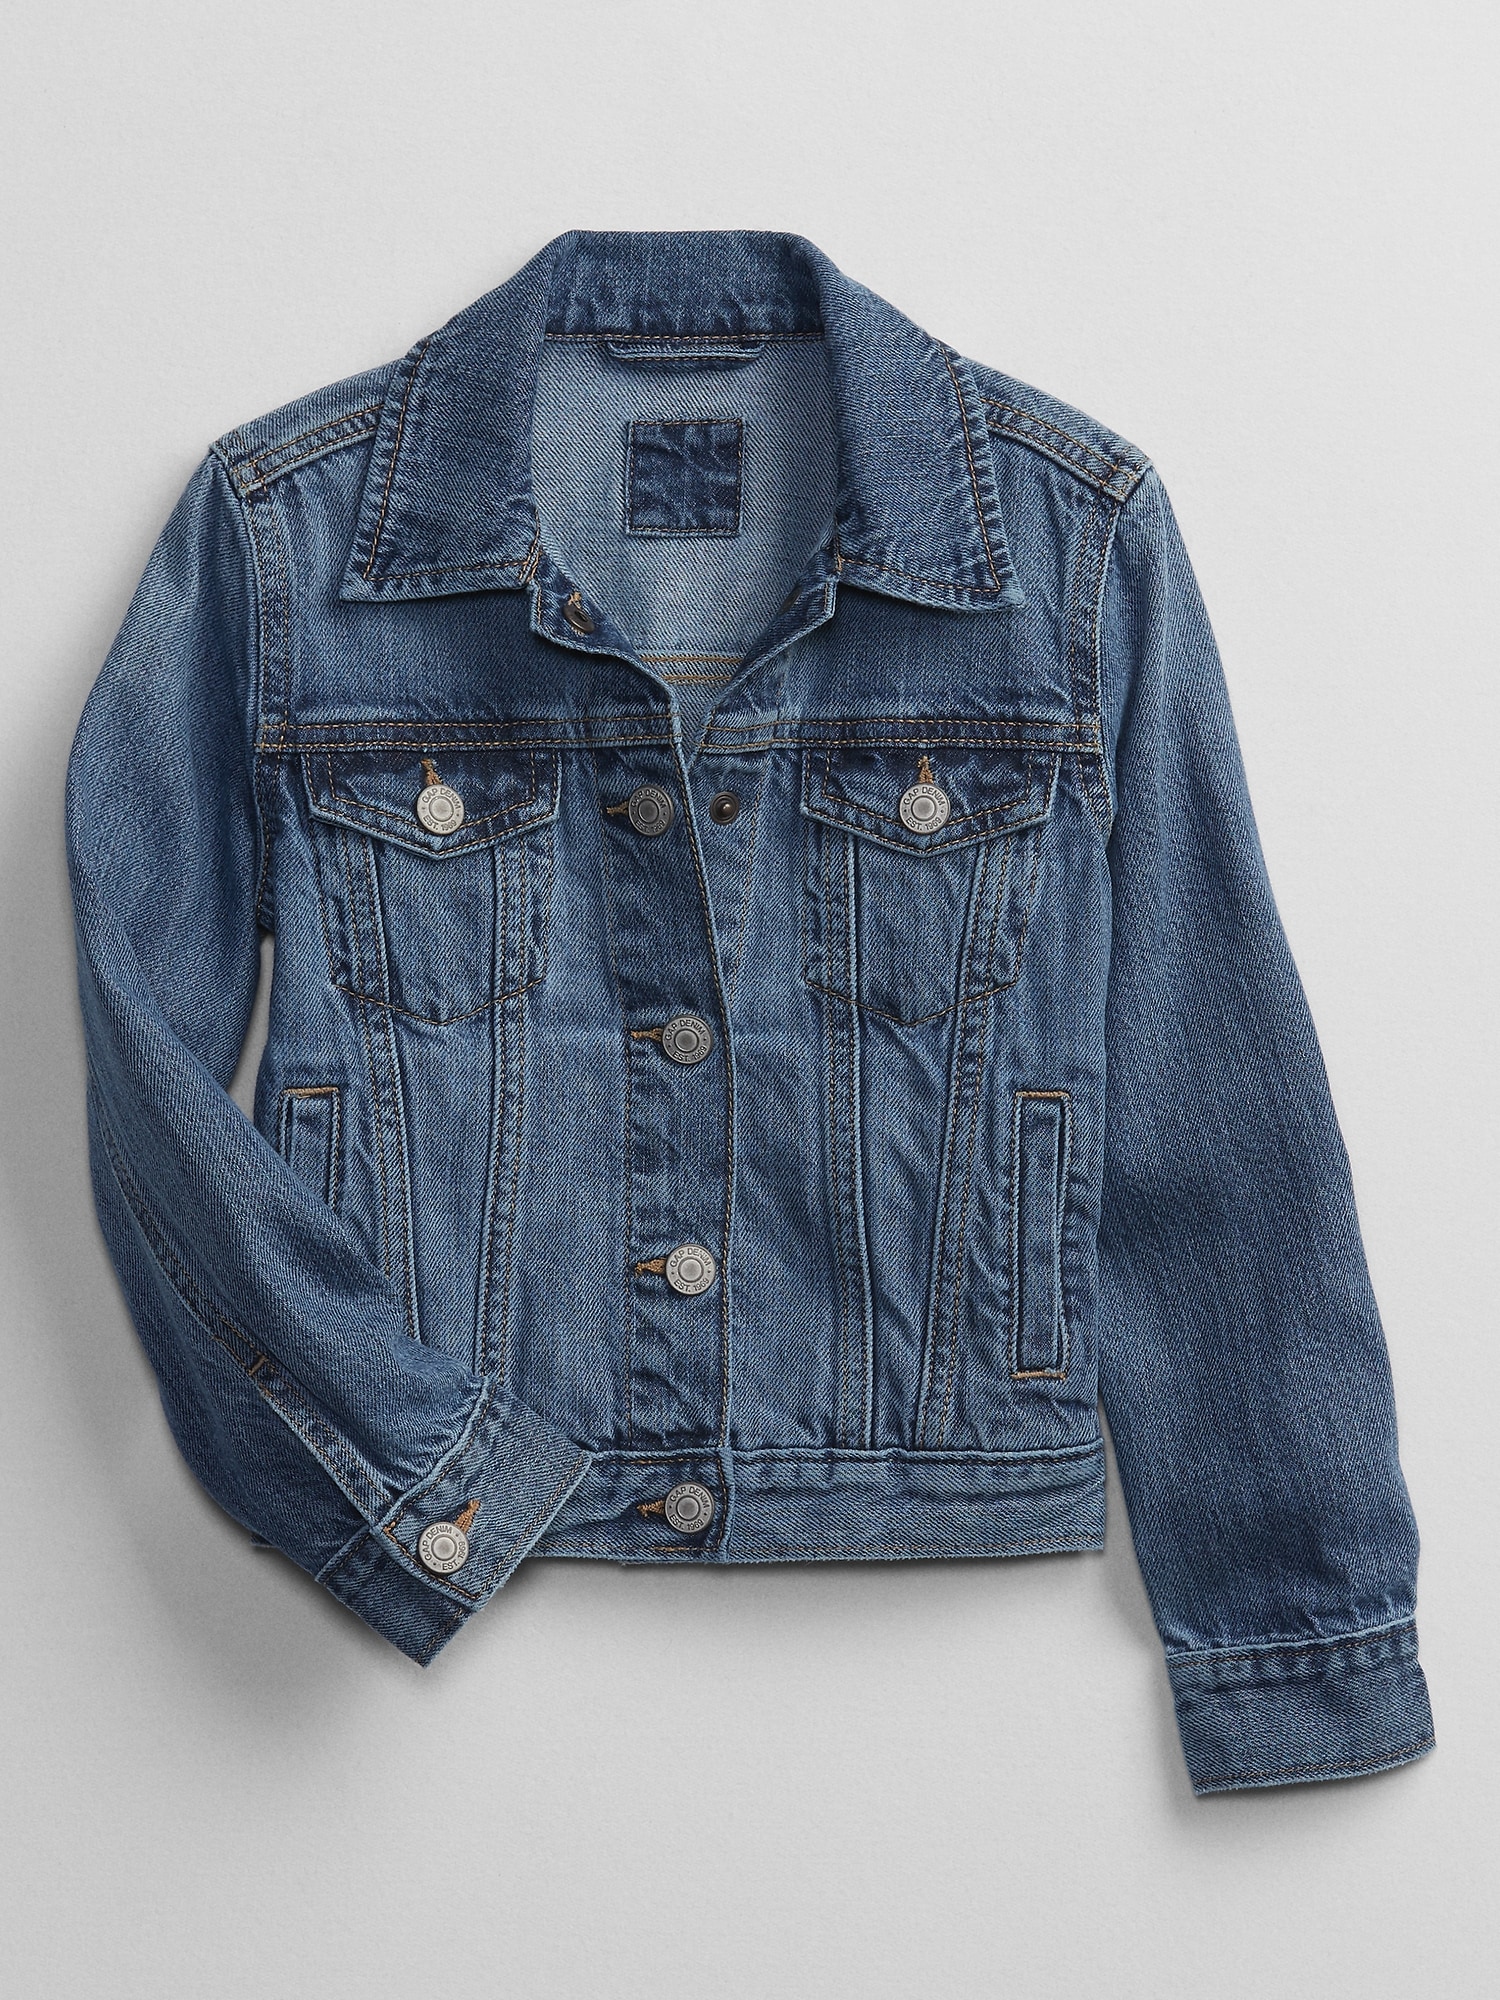 Using Patches and Pins To Spice Up Your Jean Jacket - Society19